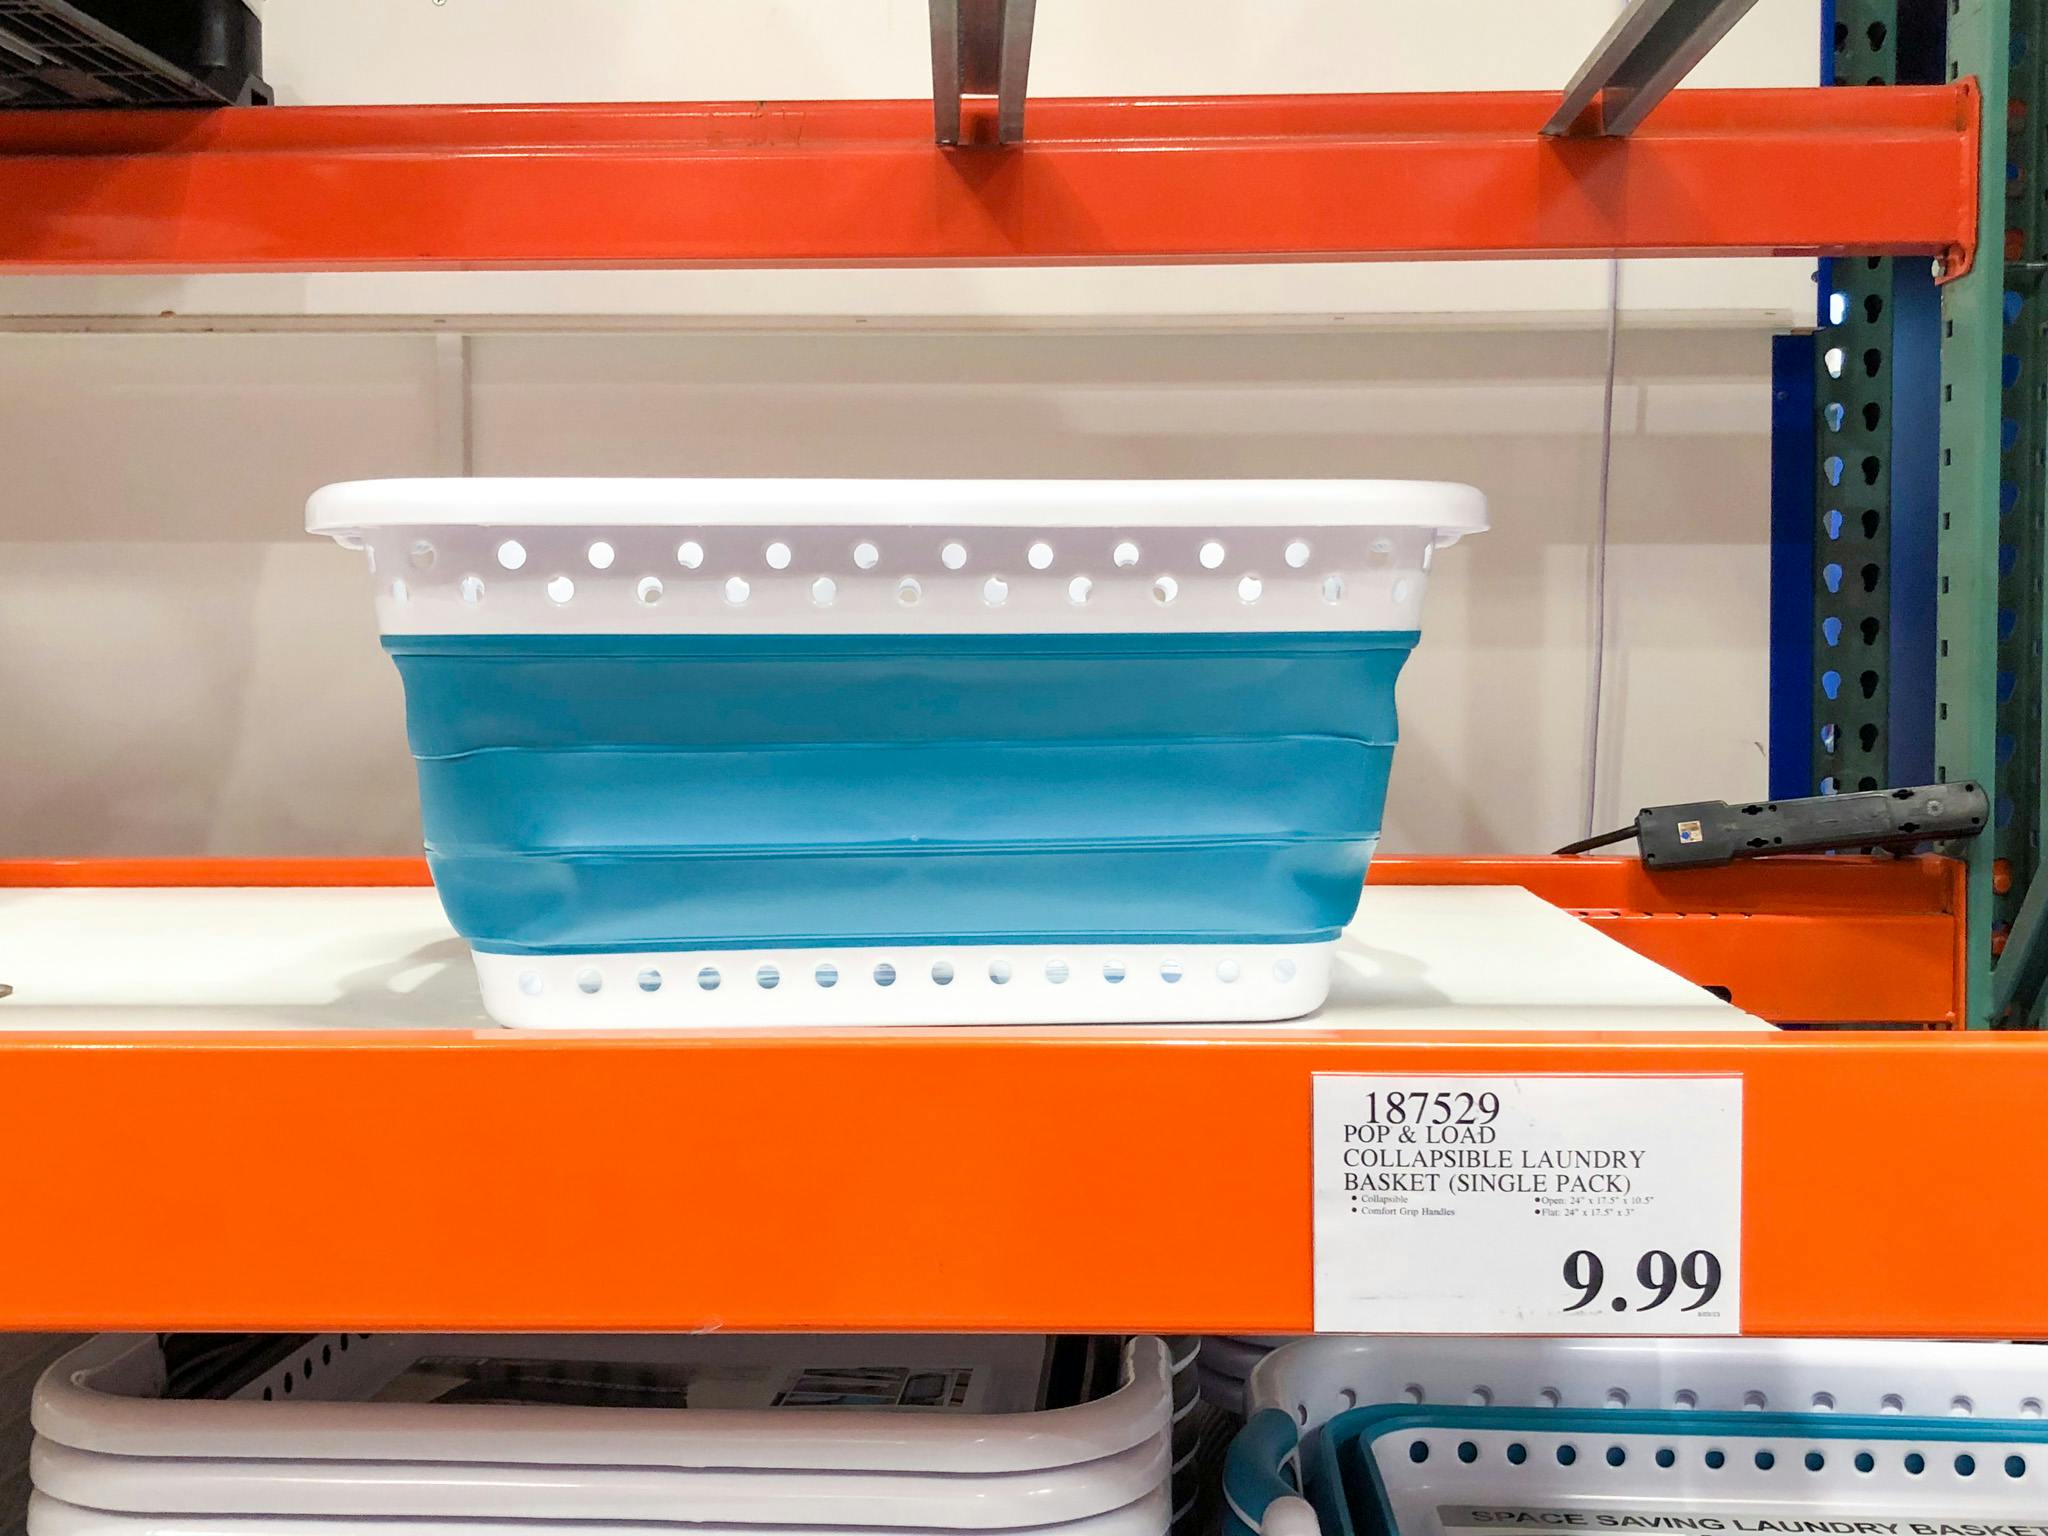 Pop & Load Collapsible Laundry Basket, Only $9.99 at Costco - The